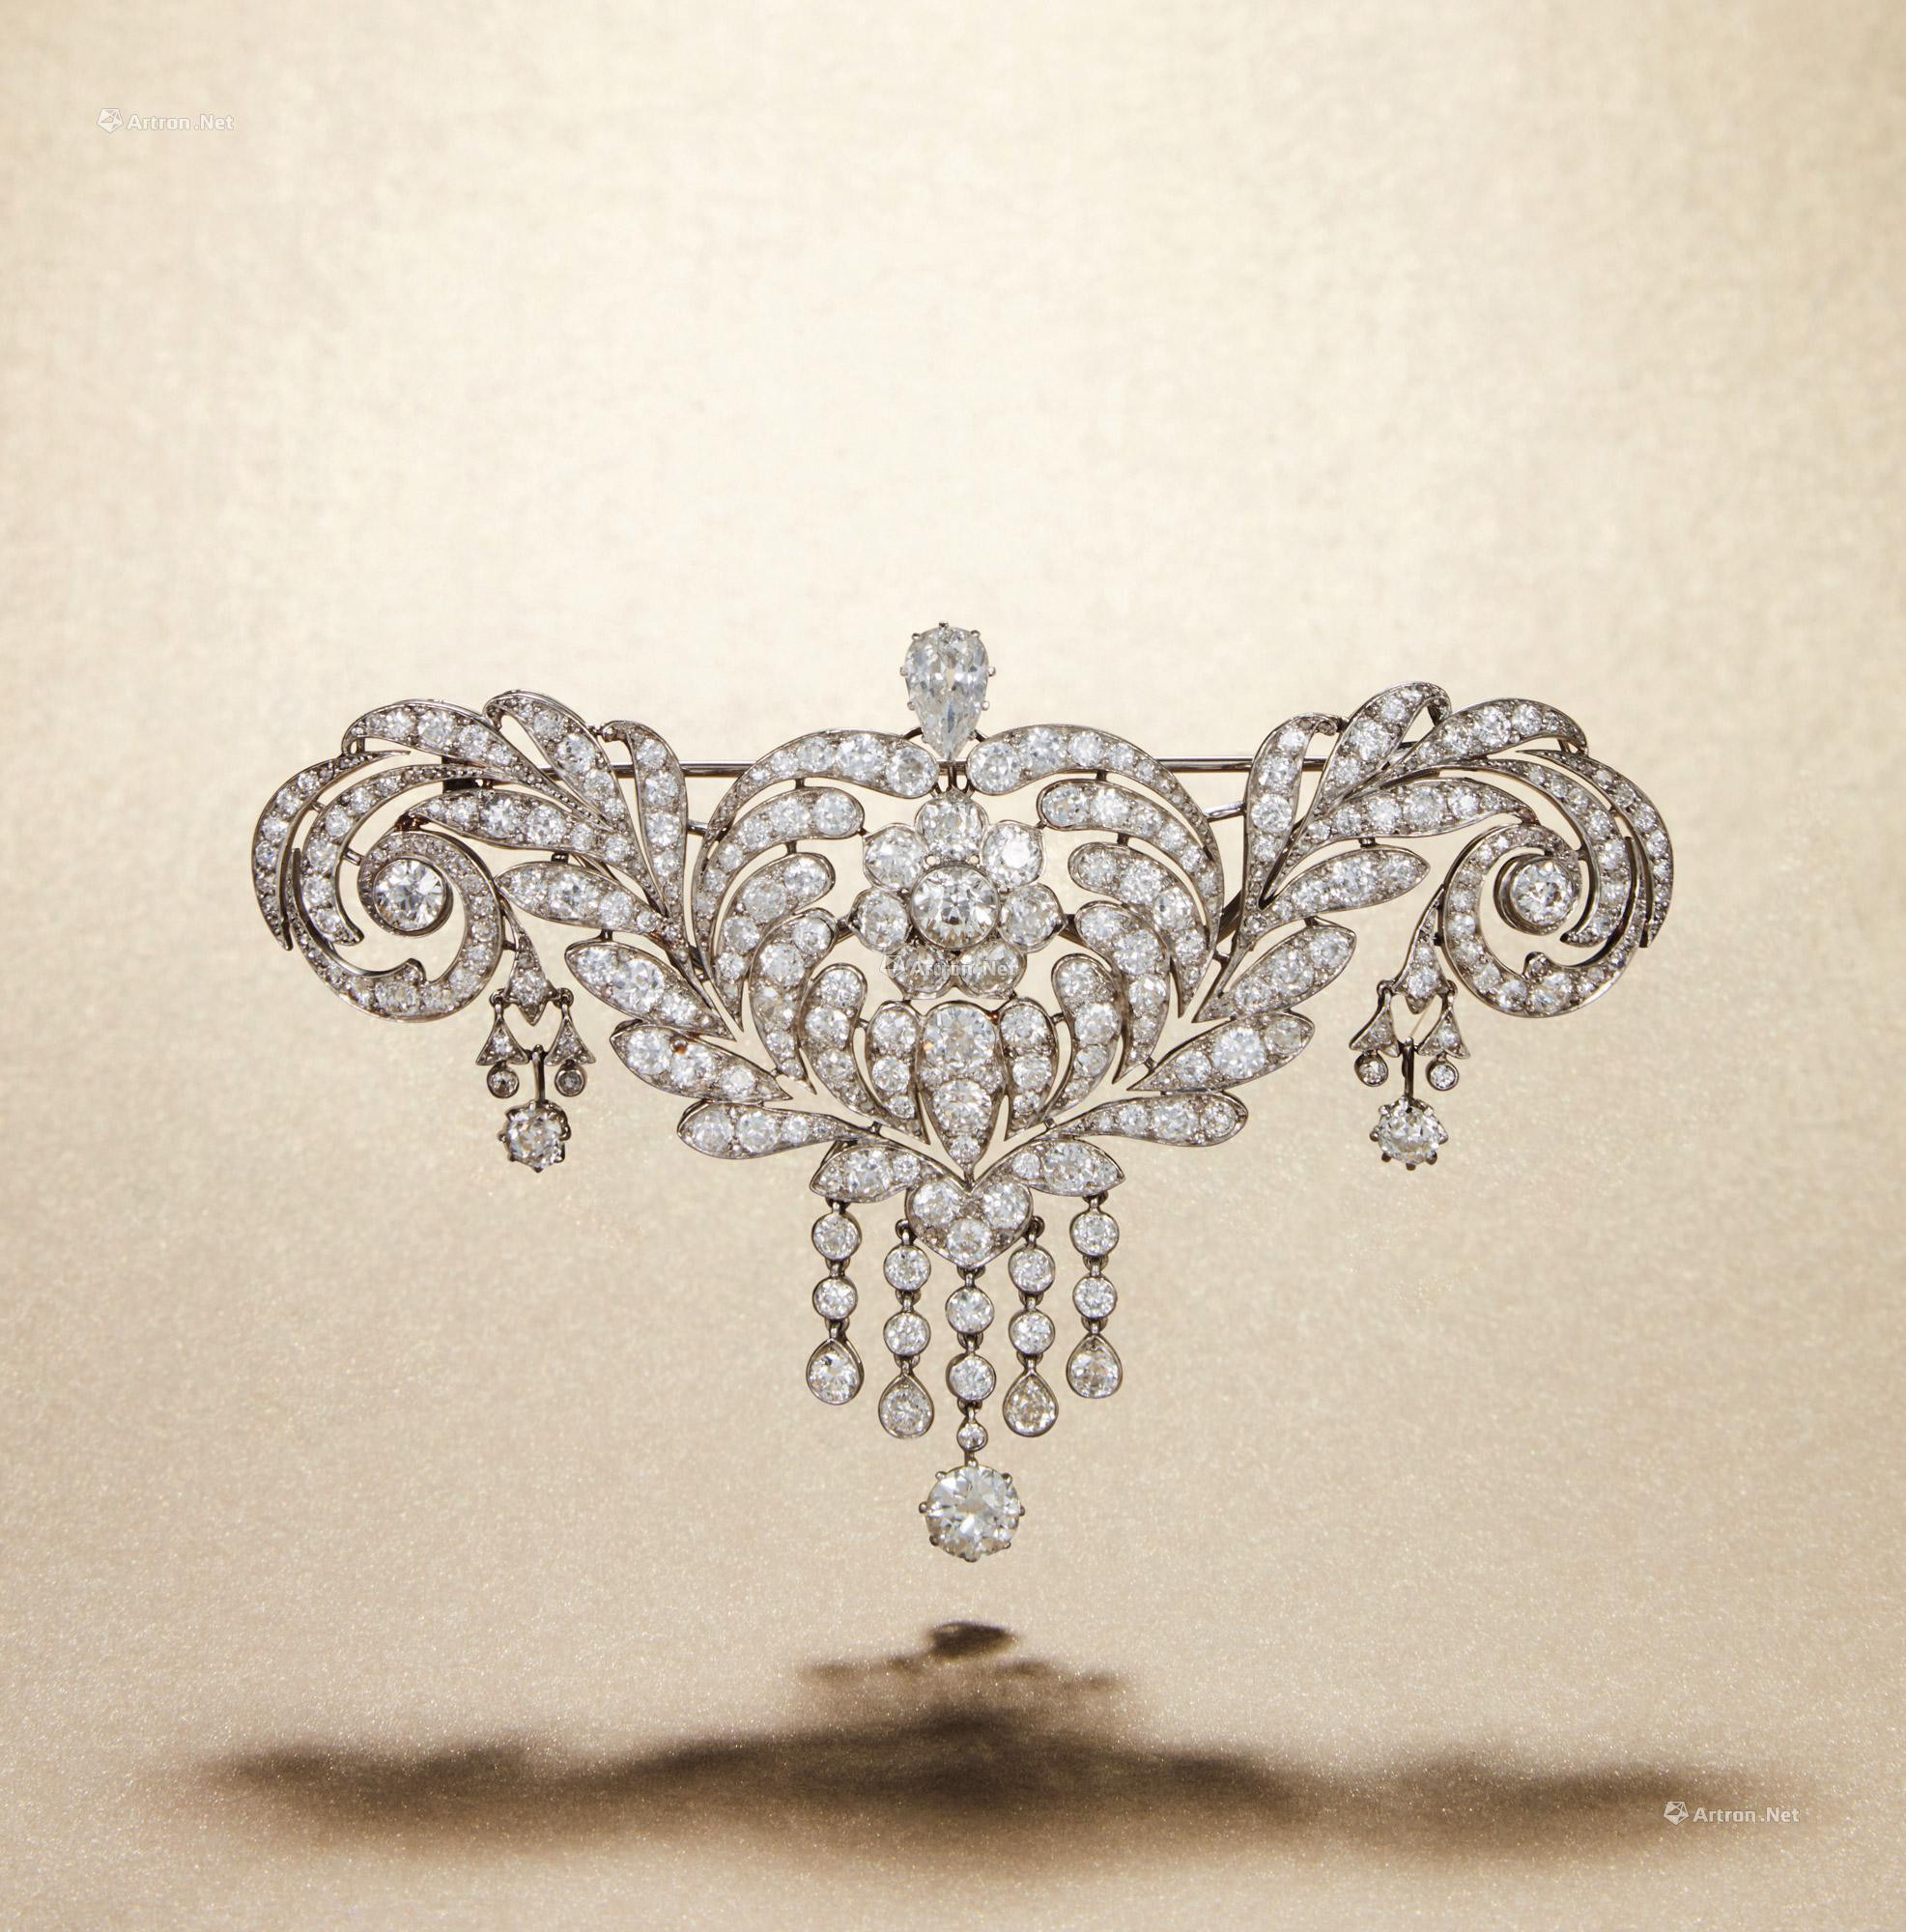 A DIAMOND BROOCH MOUNTED IN WHITE GOLD